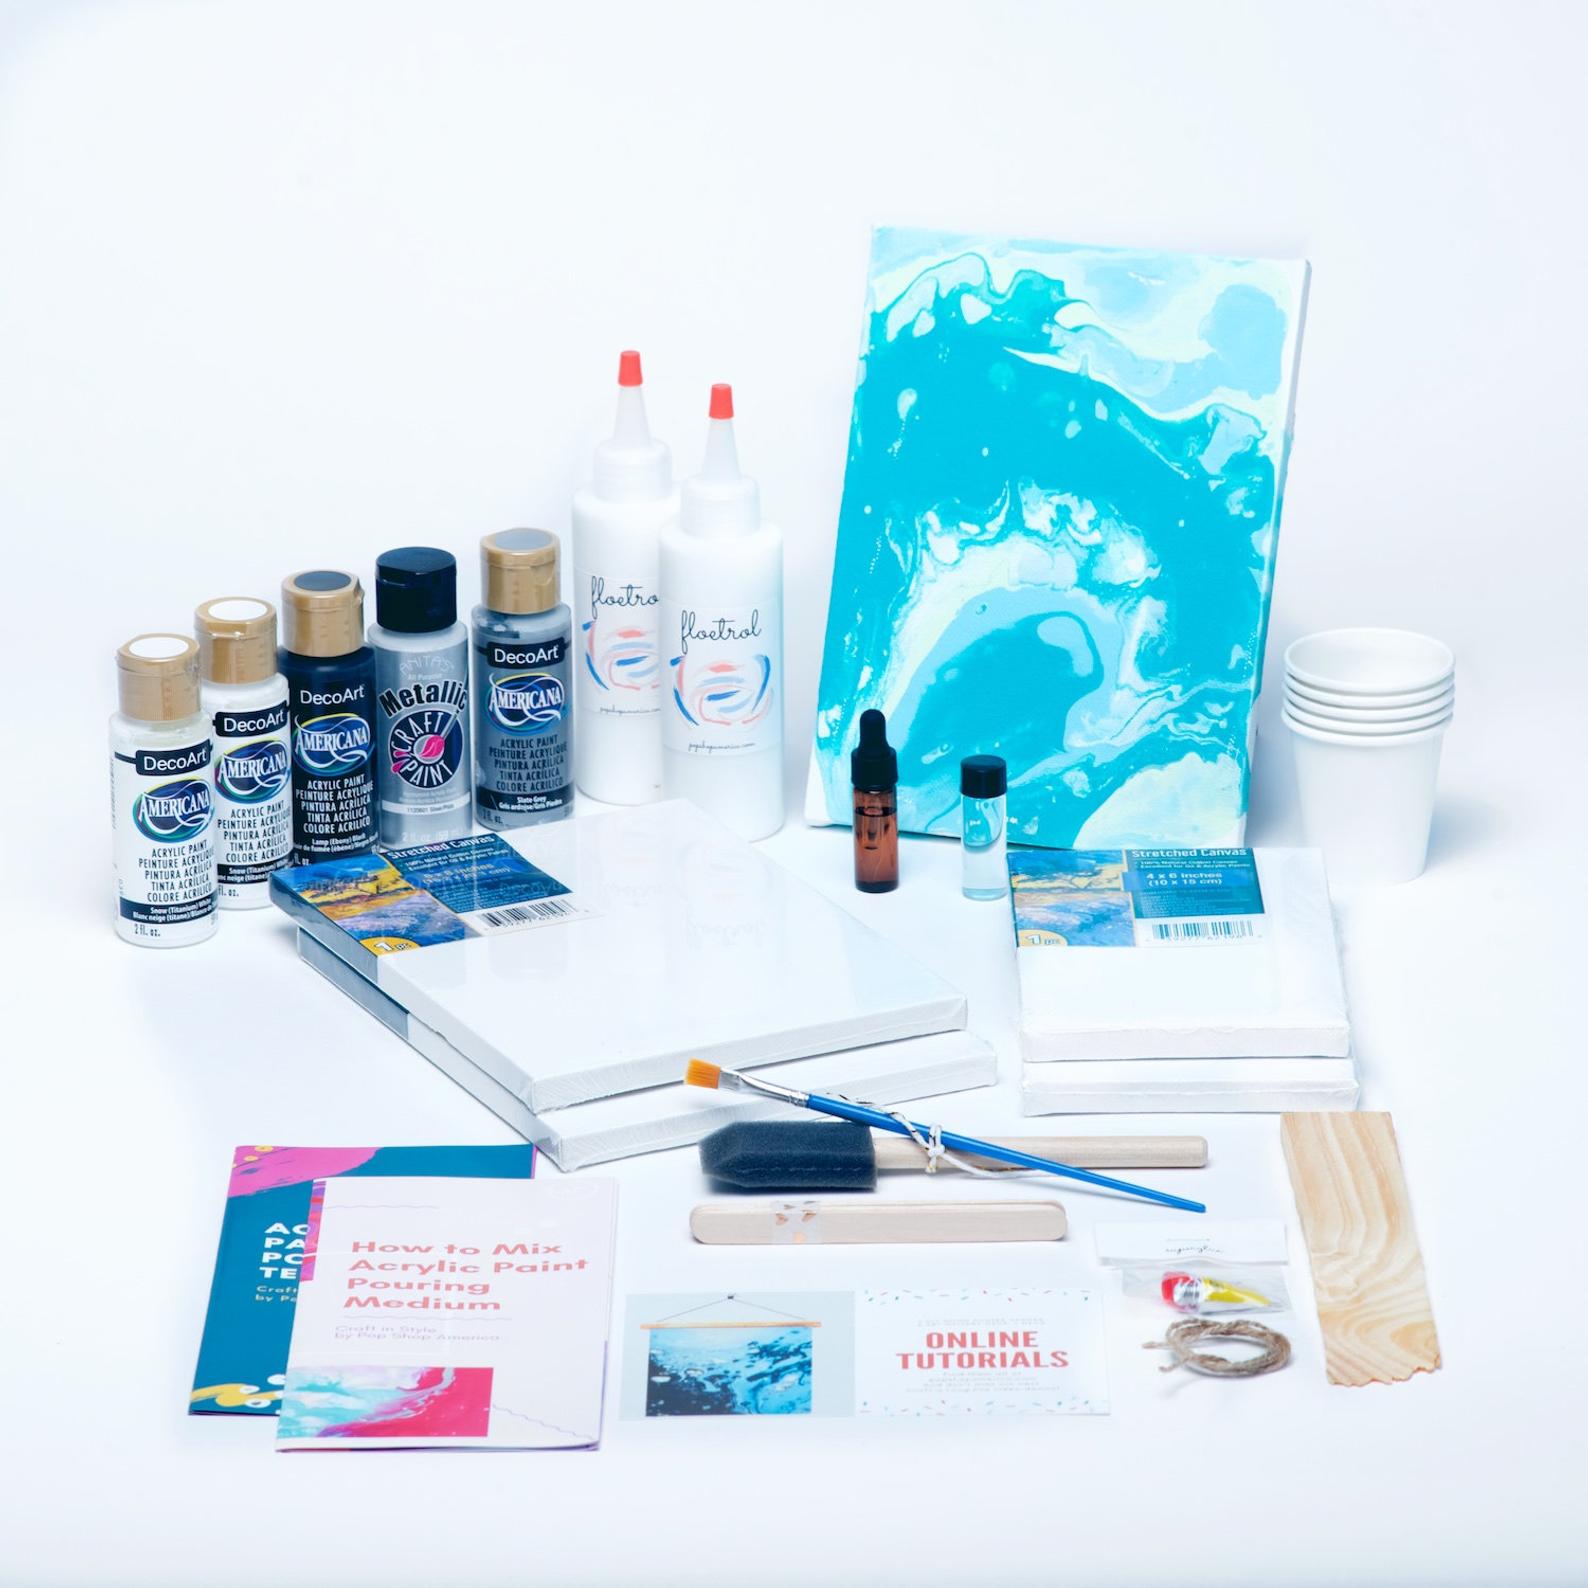 Acrylic Paint Pouring Kits - DIY Art in a Box - Arts and Crafts Ideas